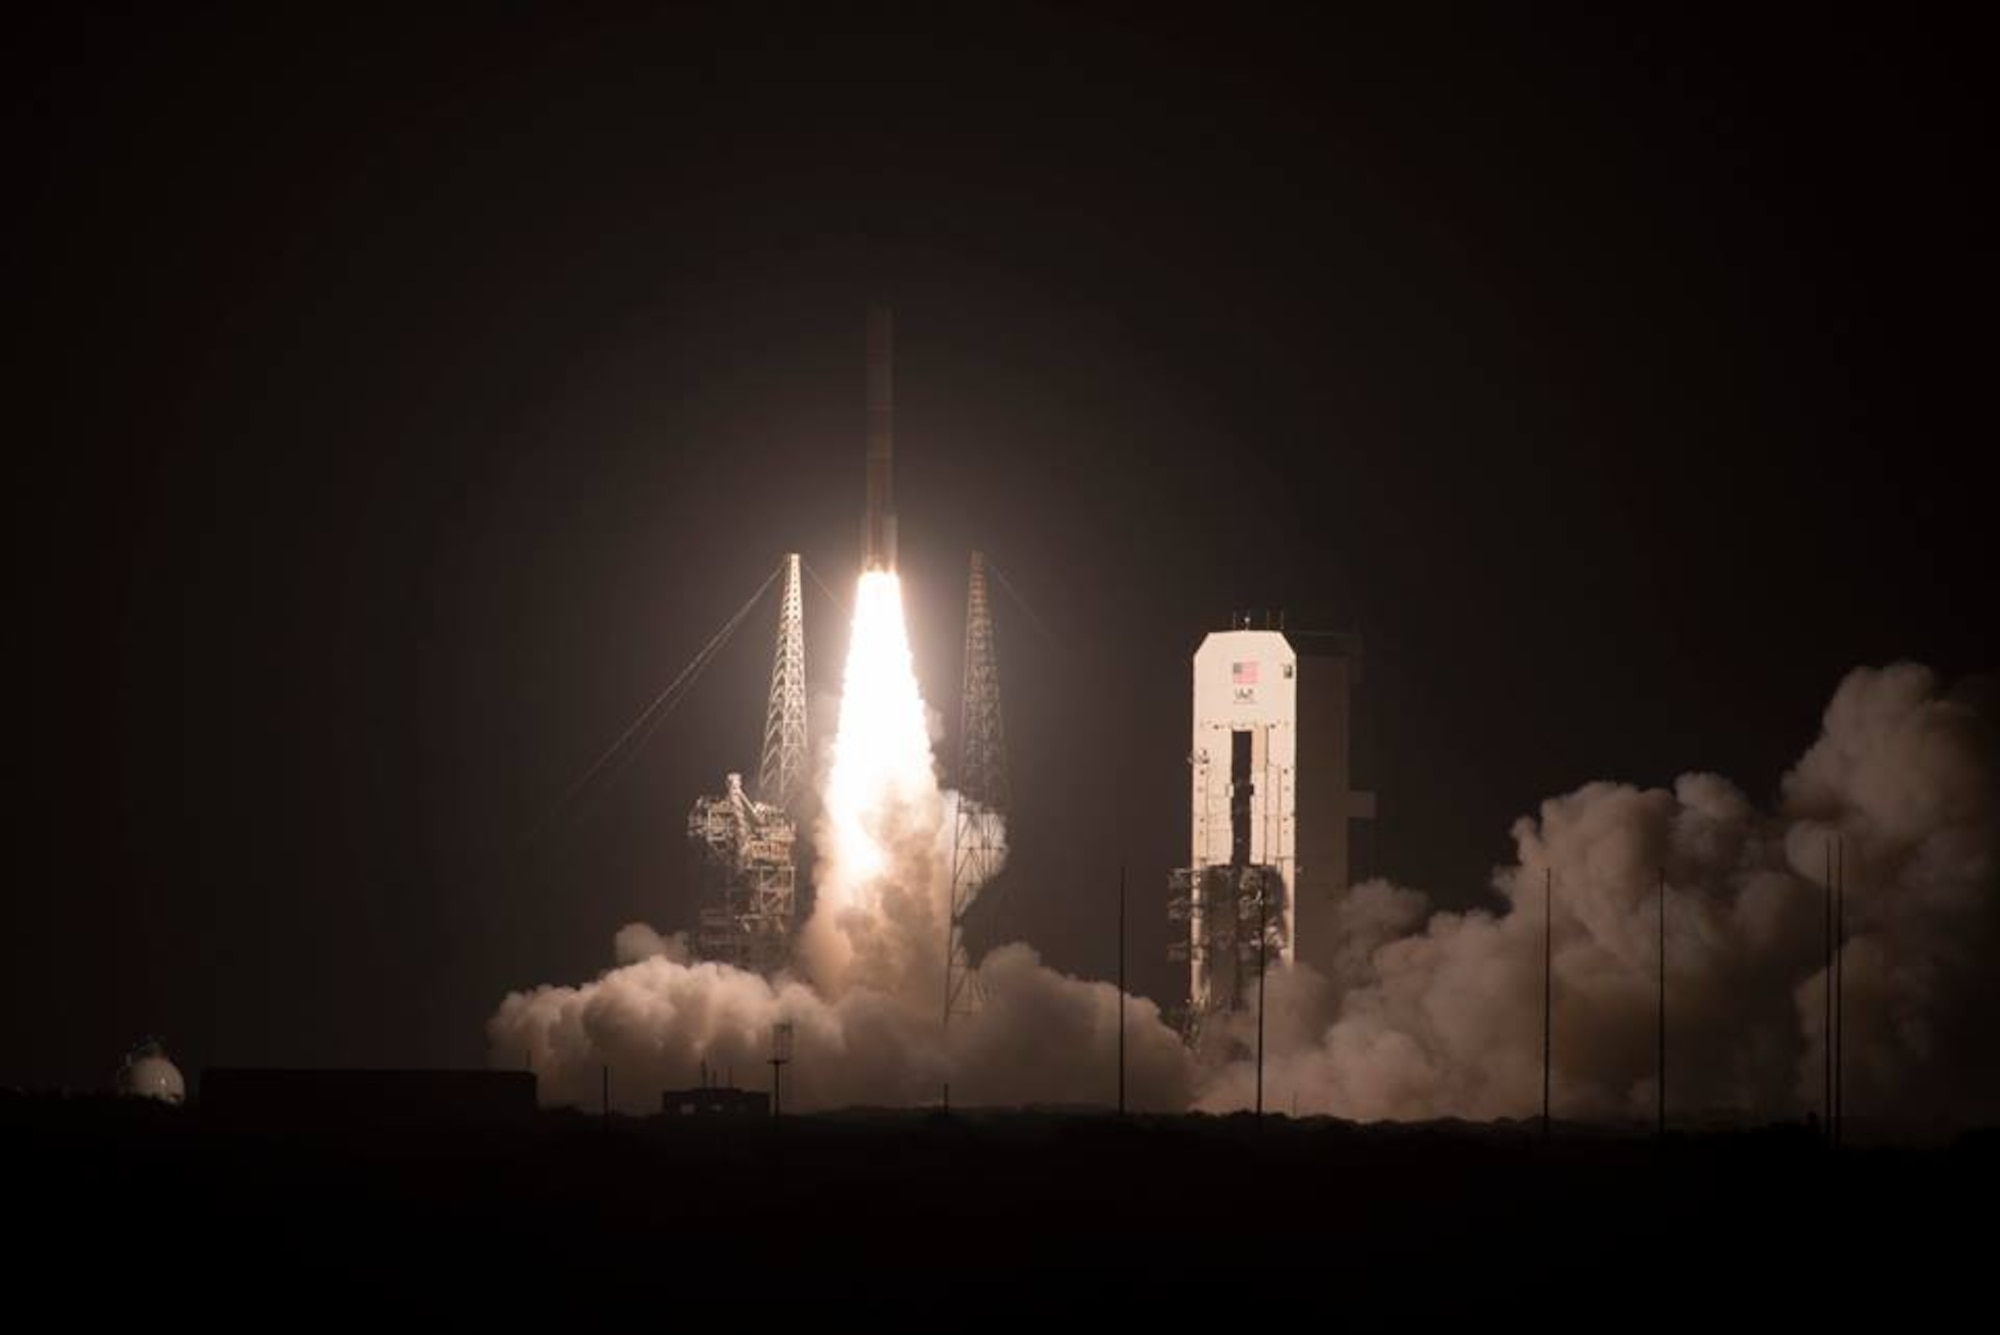 The United Launch Alliance’s Delta IV rocket launches with a Wideband Global SATCOM WGS-10 satellite from Cape Canaveral Air Force Station, Fla. Complex 37 on March 15, 2019. The satellite brings enhanced communication capability for command and control of U.S. military forces on the battlefield. (U.S. Air Force photo by Tech. Sgt. Andrew Satran)